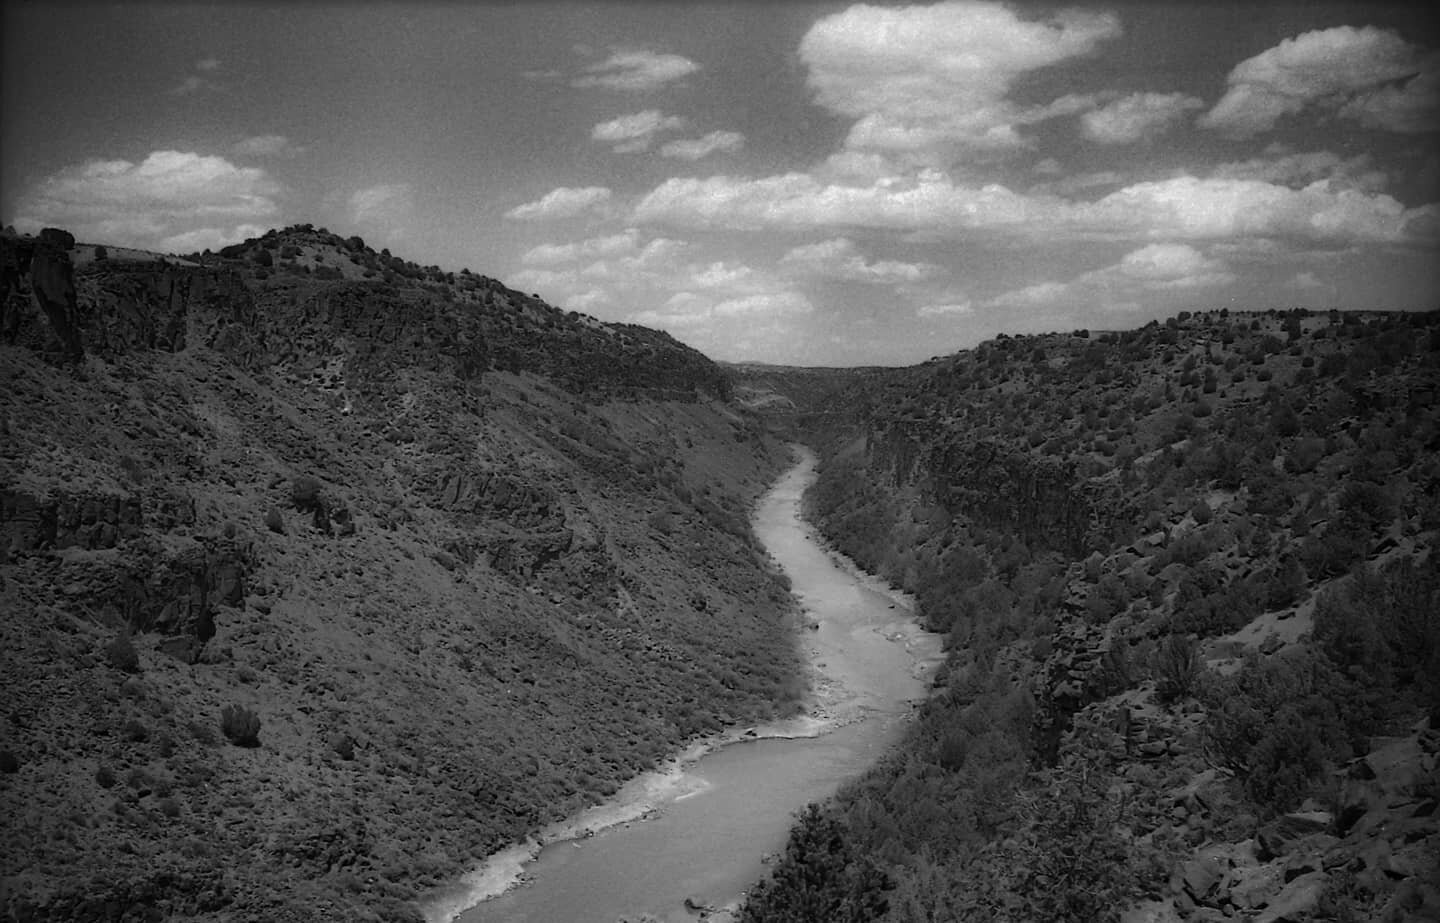 Last pic of the Rio Grande (for now). This one in gorgeous black and white film.